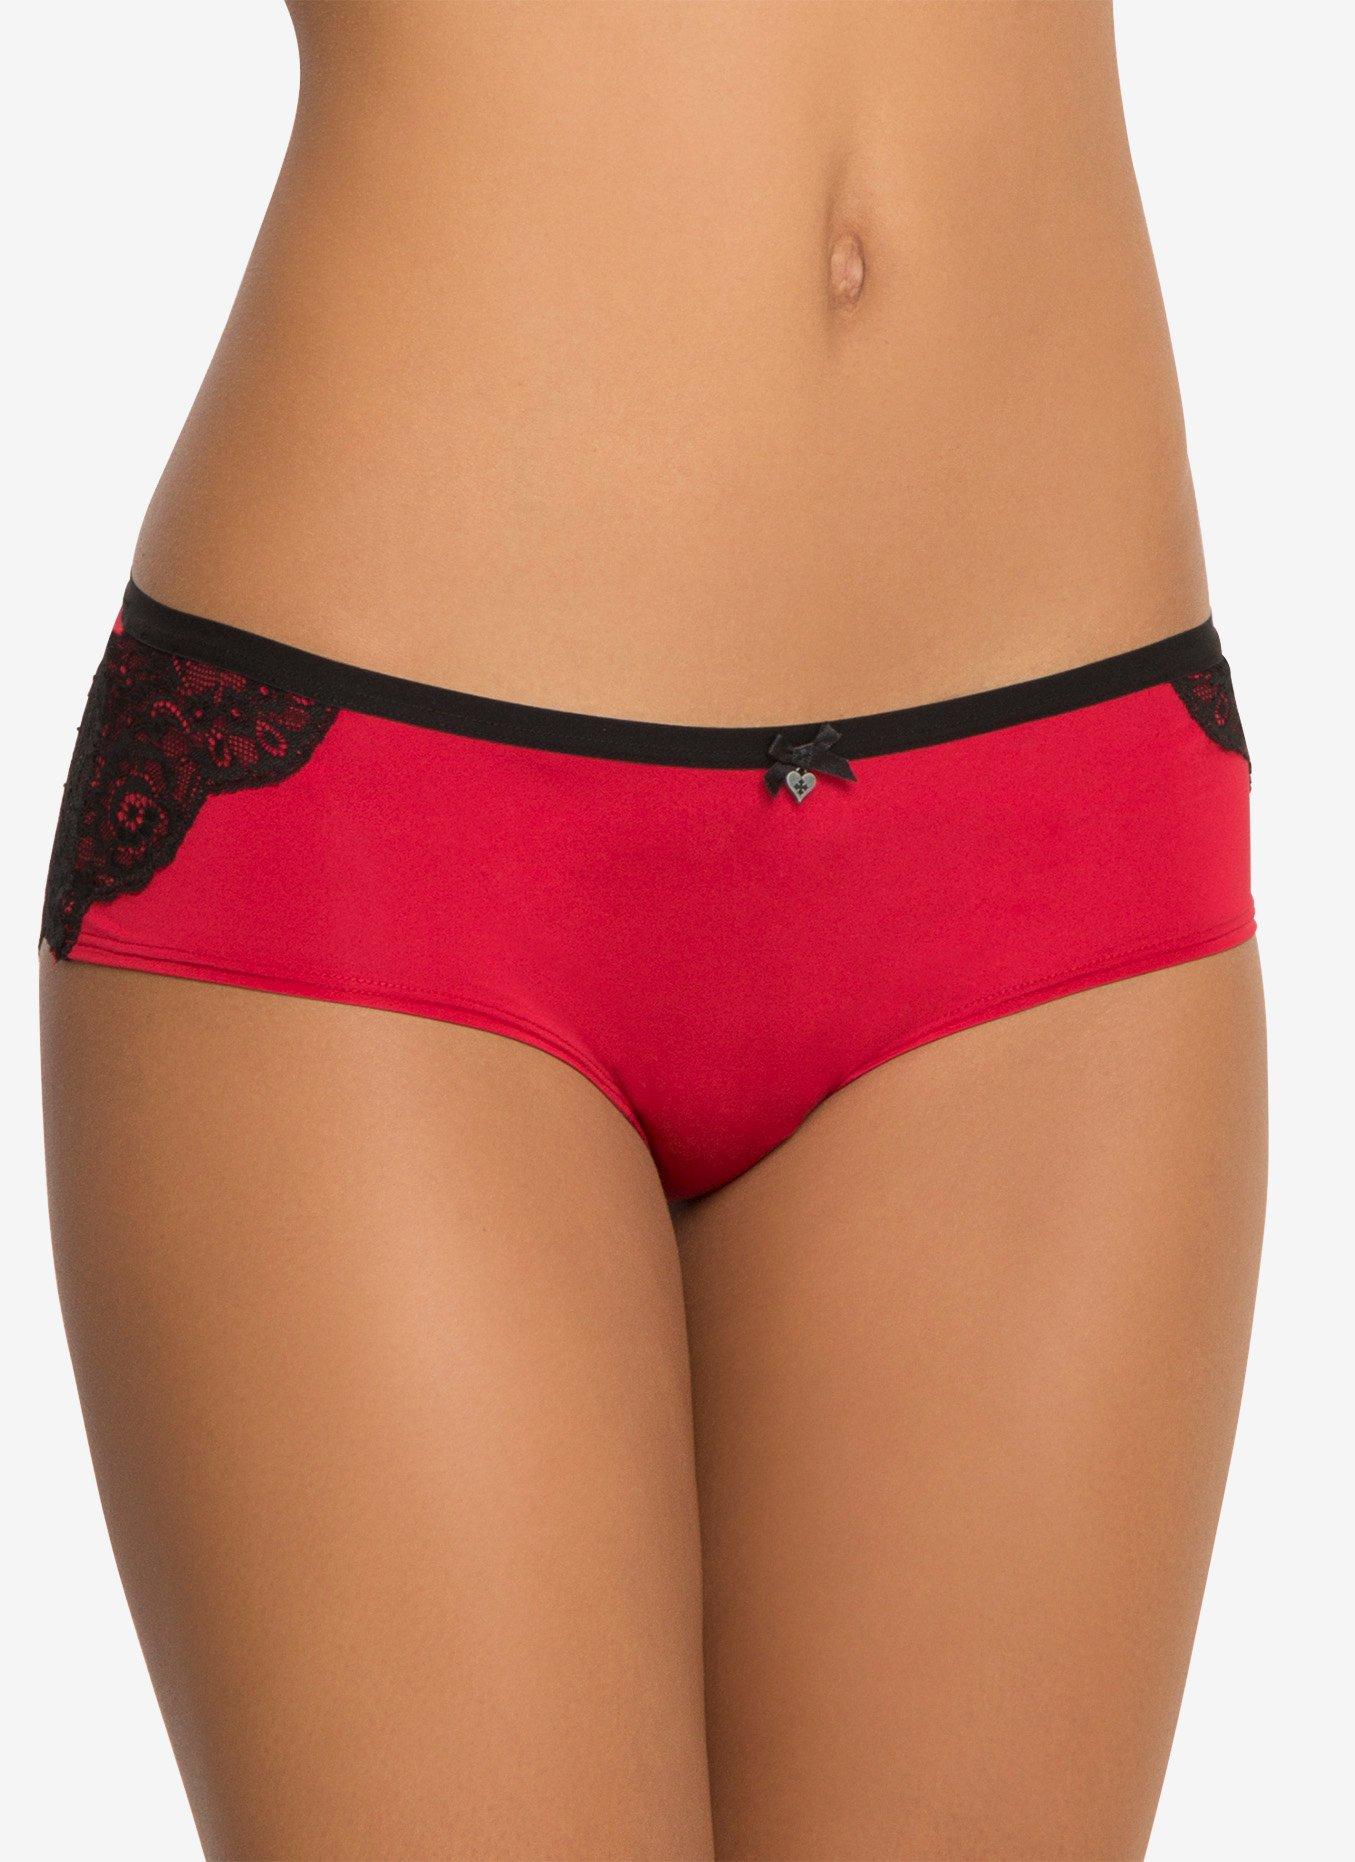 Microfiber & Lace Cheekster Panty, RED, hi-res